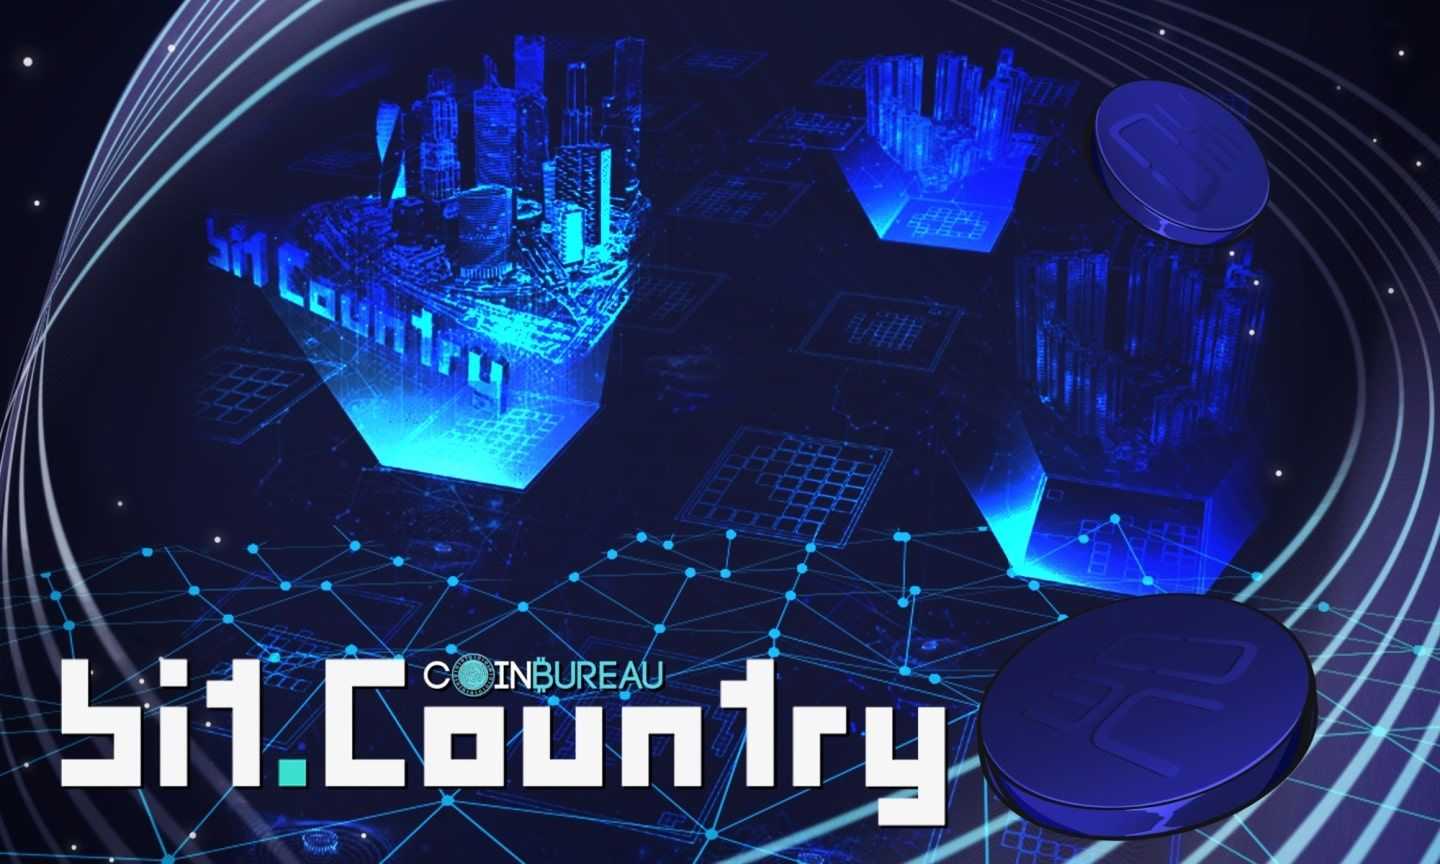 Bit.Country Review: A Game-Changing, Groundbreaking Metaverse?